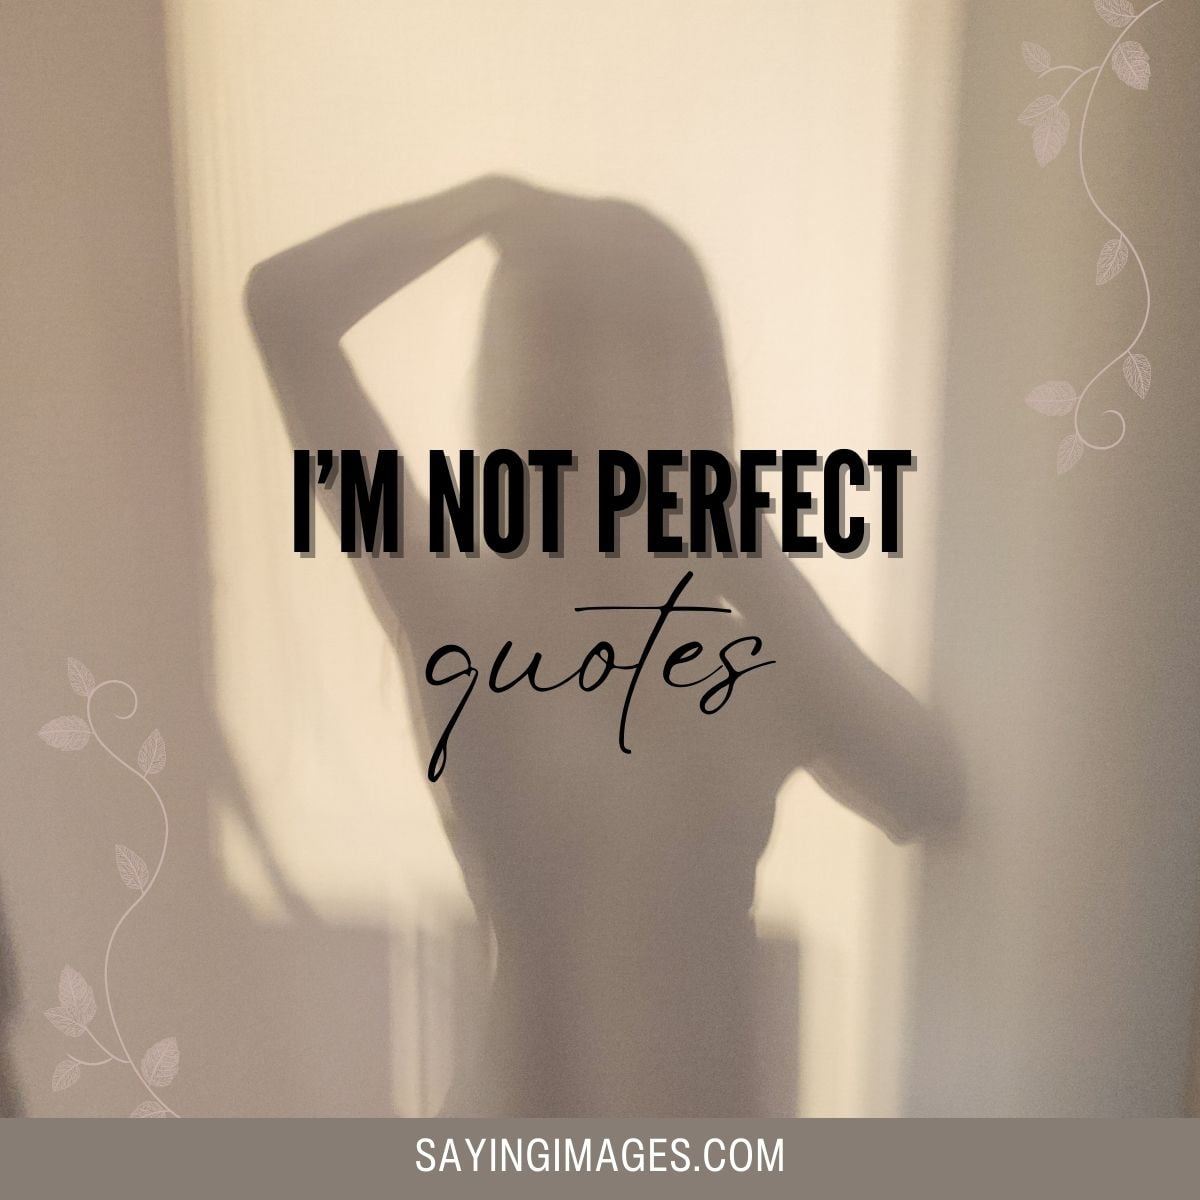 I’m Not Perfect Quotes